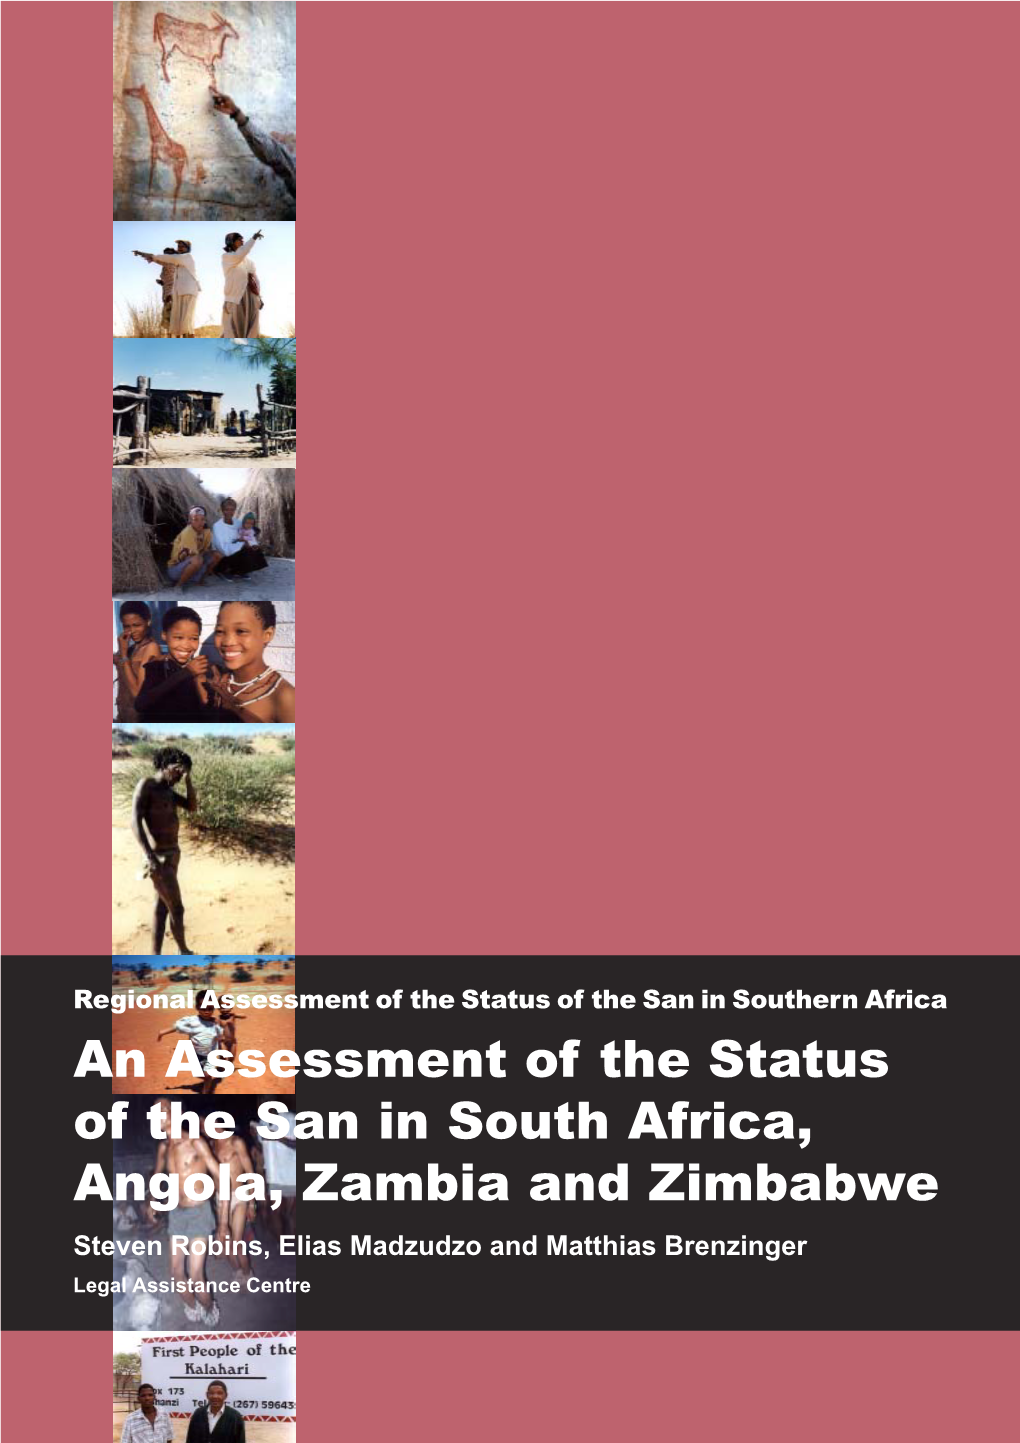 An Assessment of the Status of the San in South Africa, Angola, Zambia and Zimbabwe